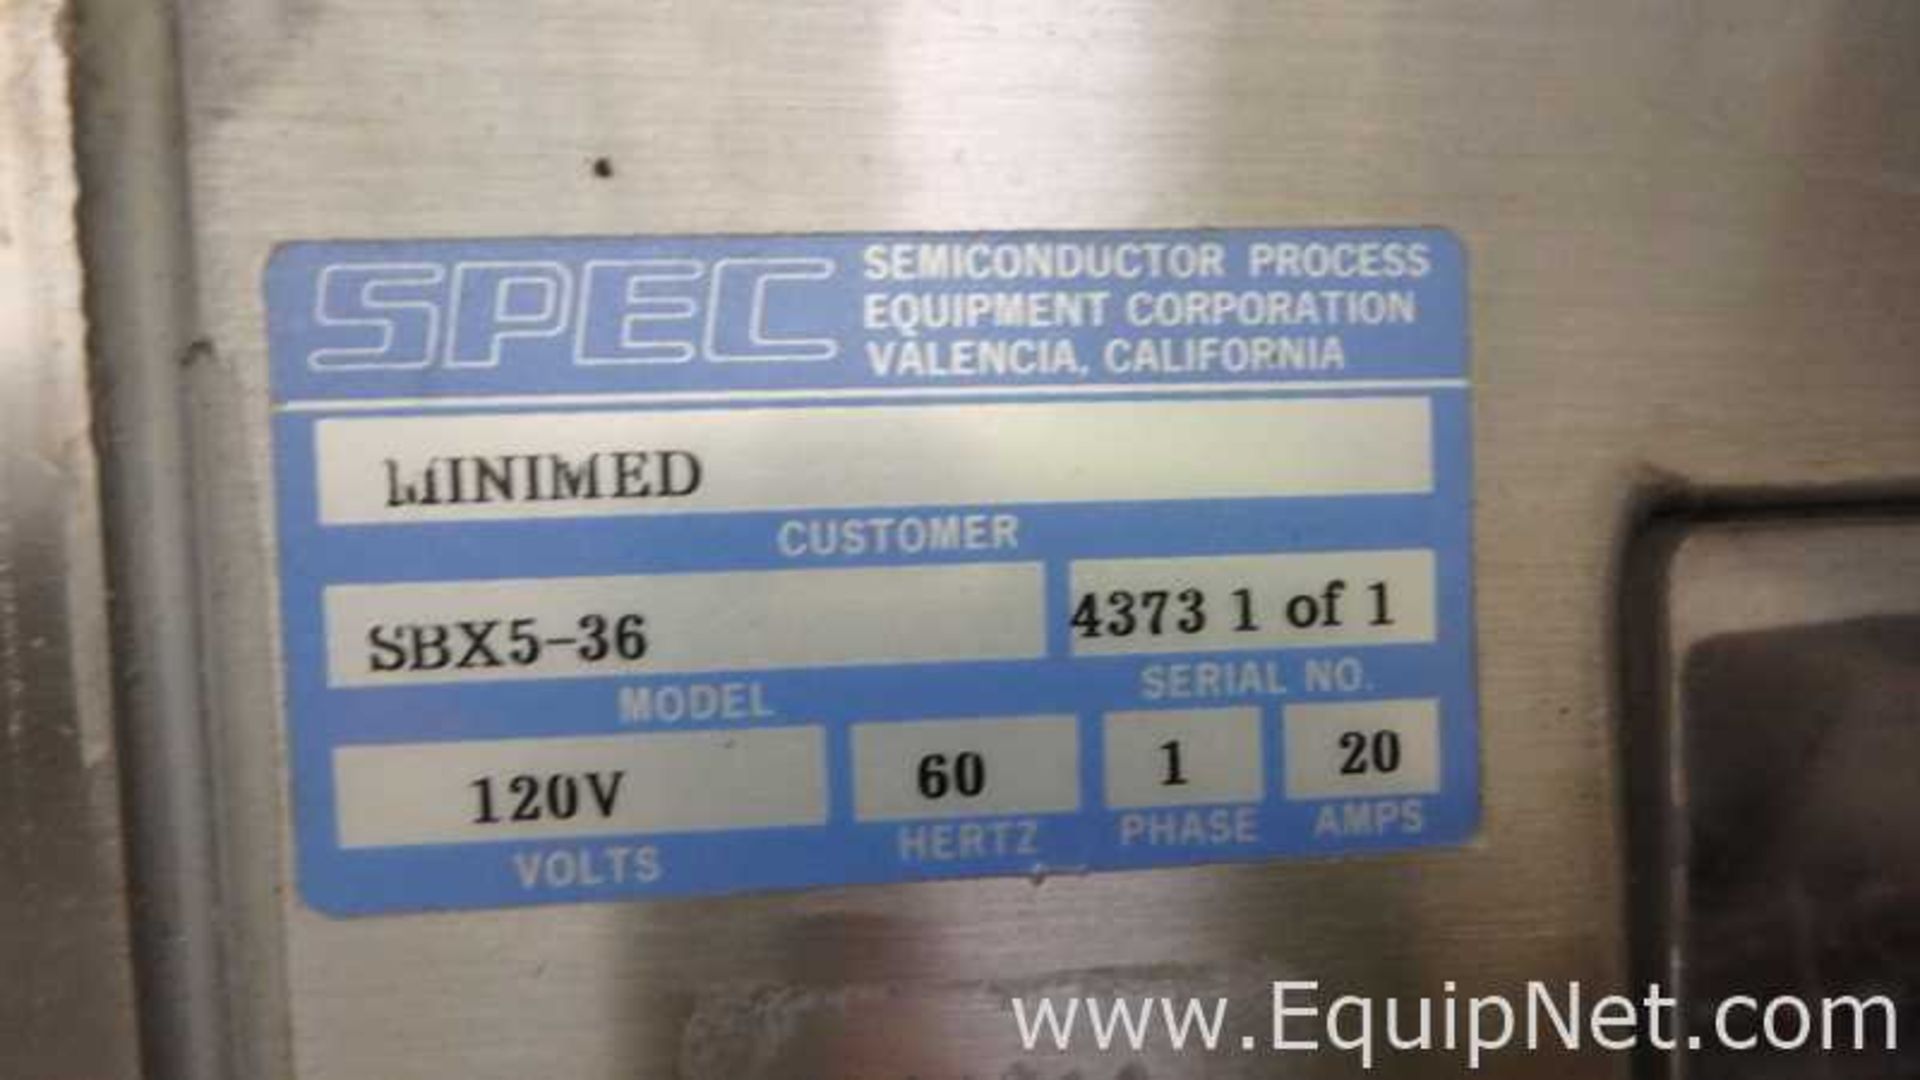 SPEC Semiconductor Process Equipment SBX5-36 Photoresist Developer System - Image 30 of 31